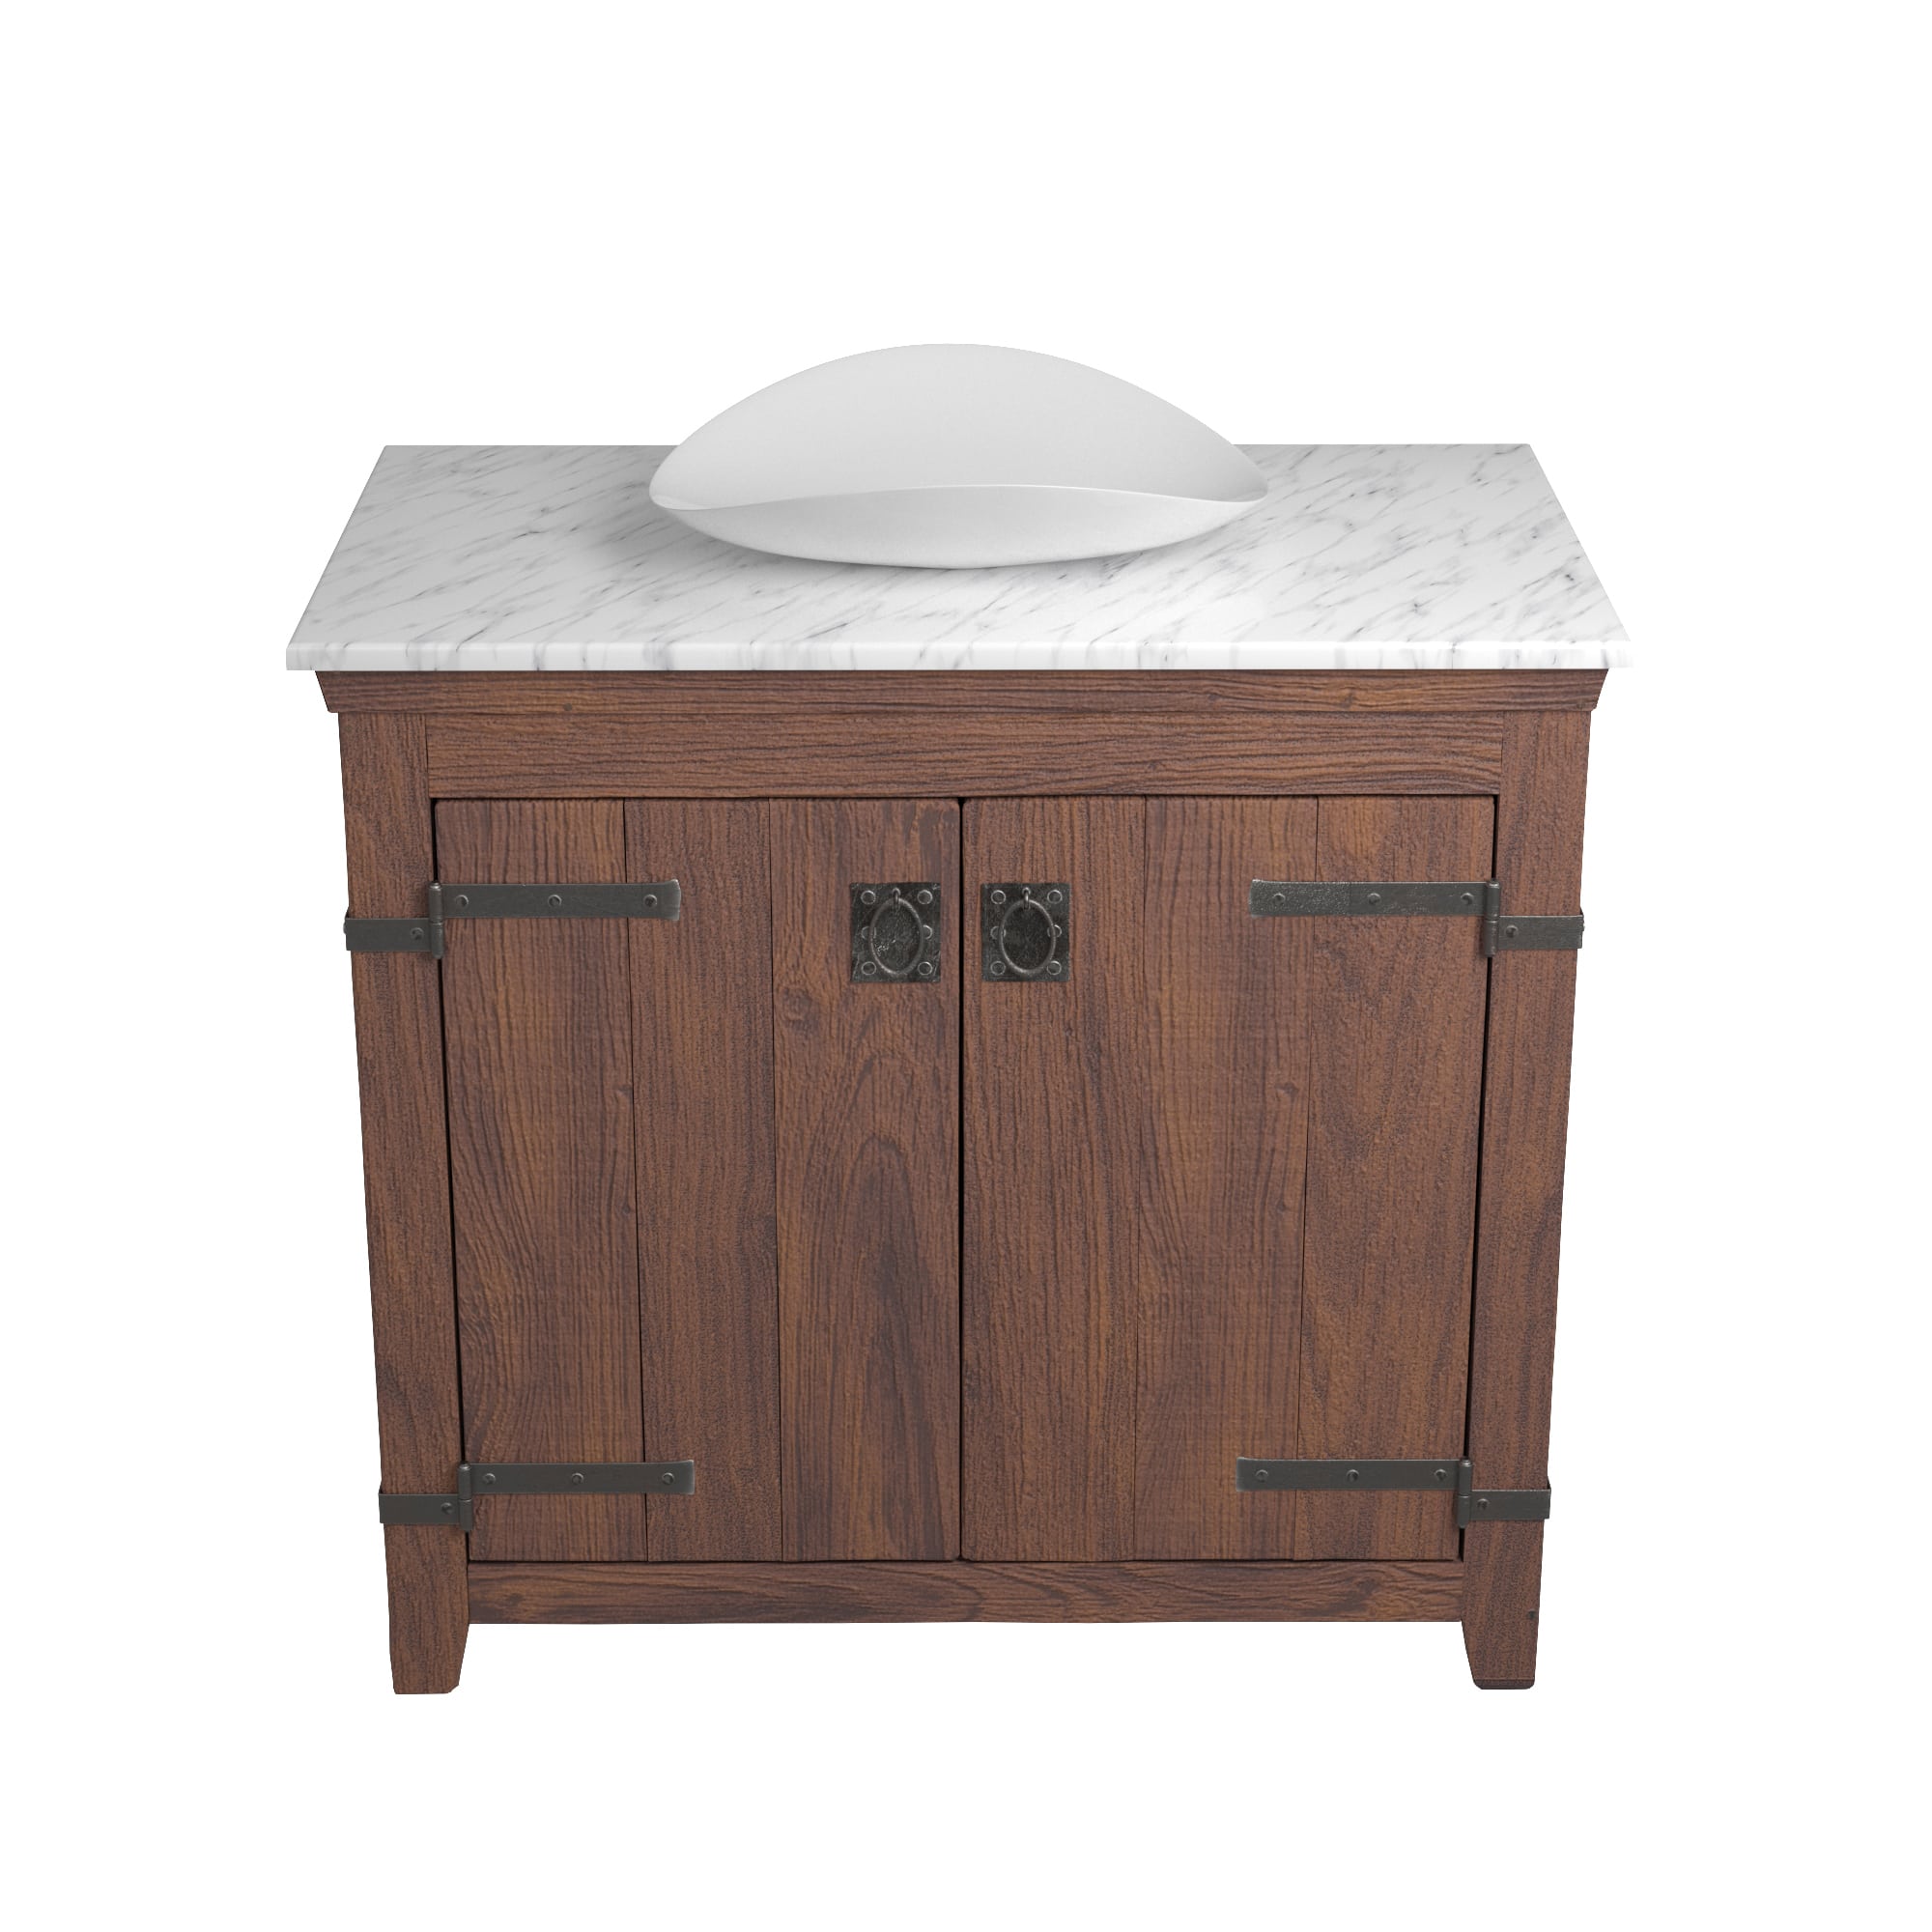 Native Trails 36" Americana Vanity in Chestnut with Carrara Marble Top and Sorrento in Bianco, Single Faucet Hole, BND36-VB-CT-MG-099